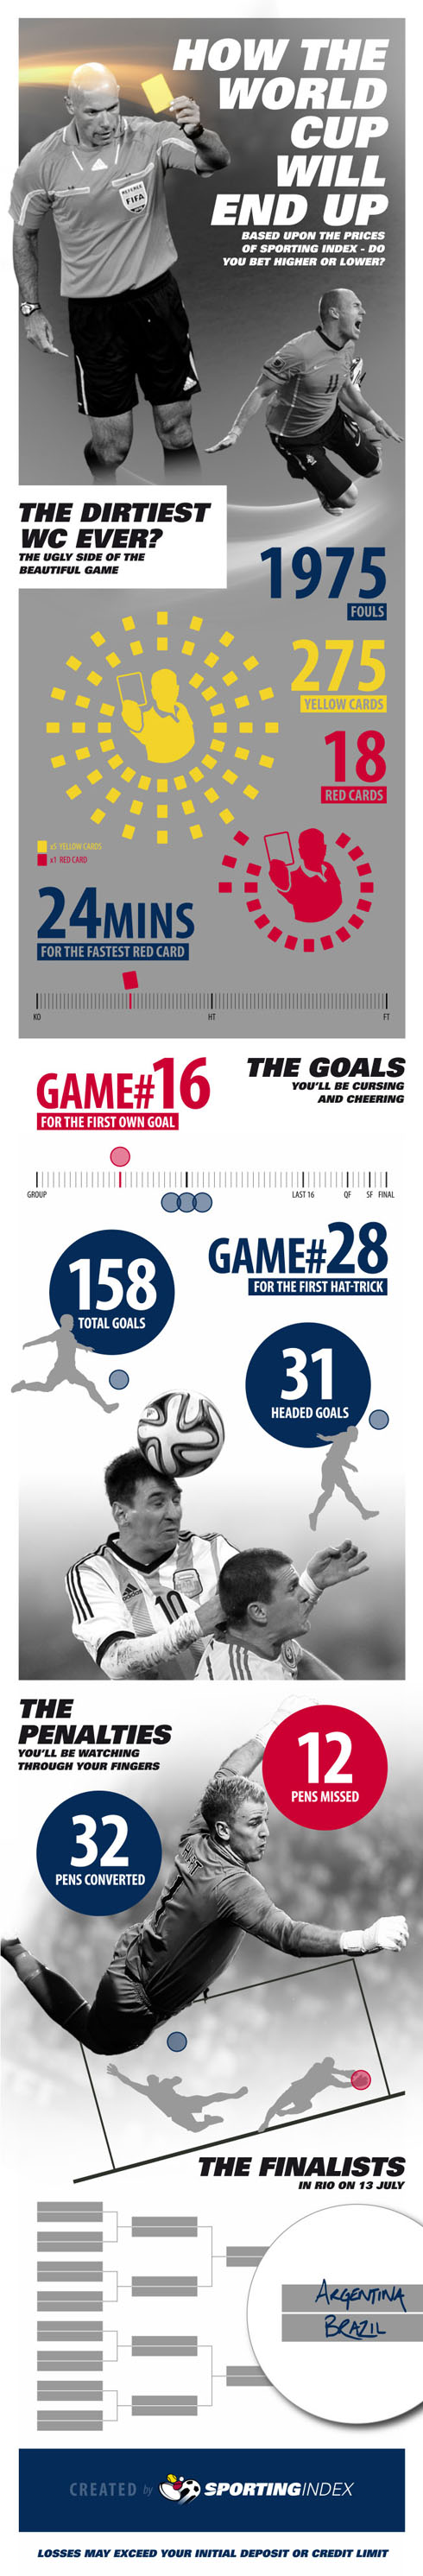 FIFA World Cup 2014 predictor infographic